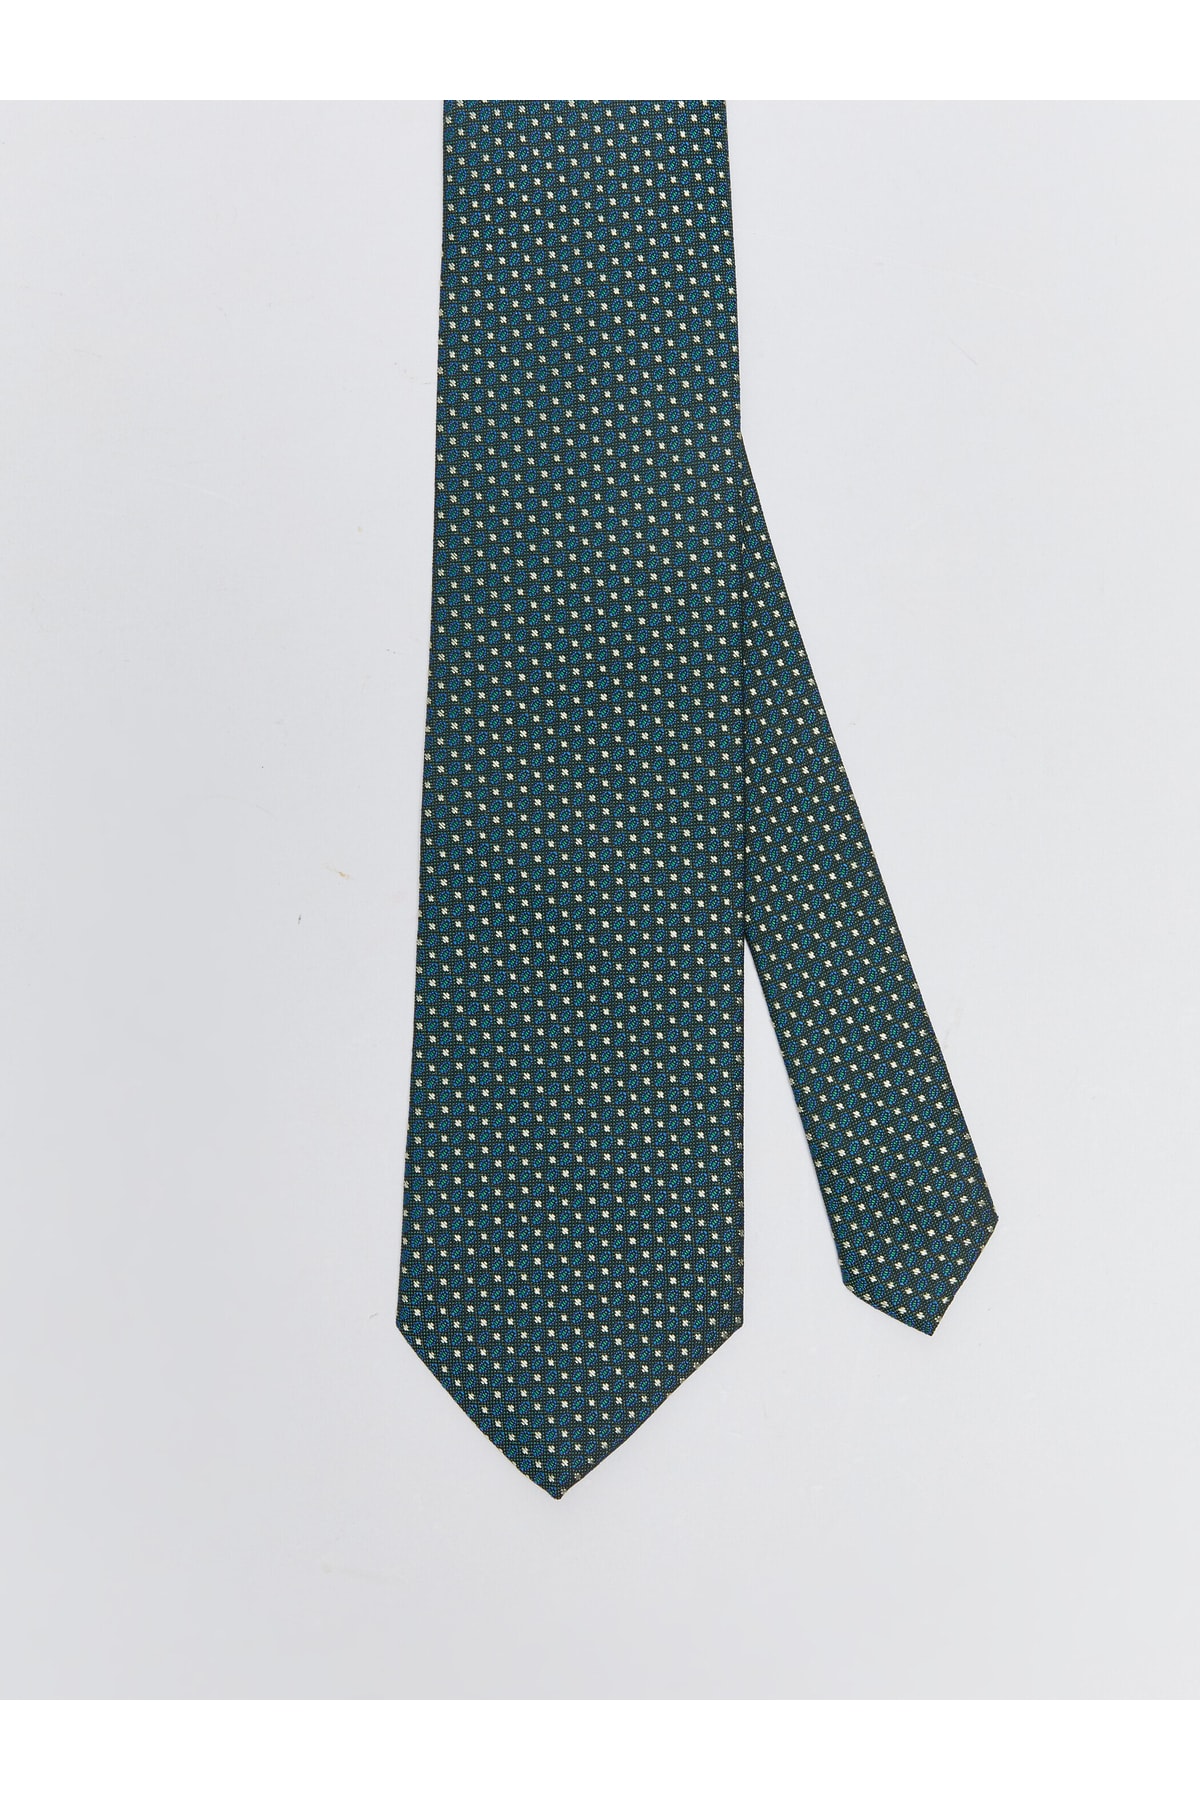 LC Waikiki Patterned Thick Men's Tie